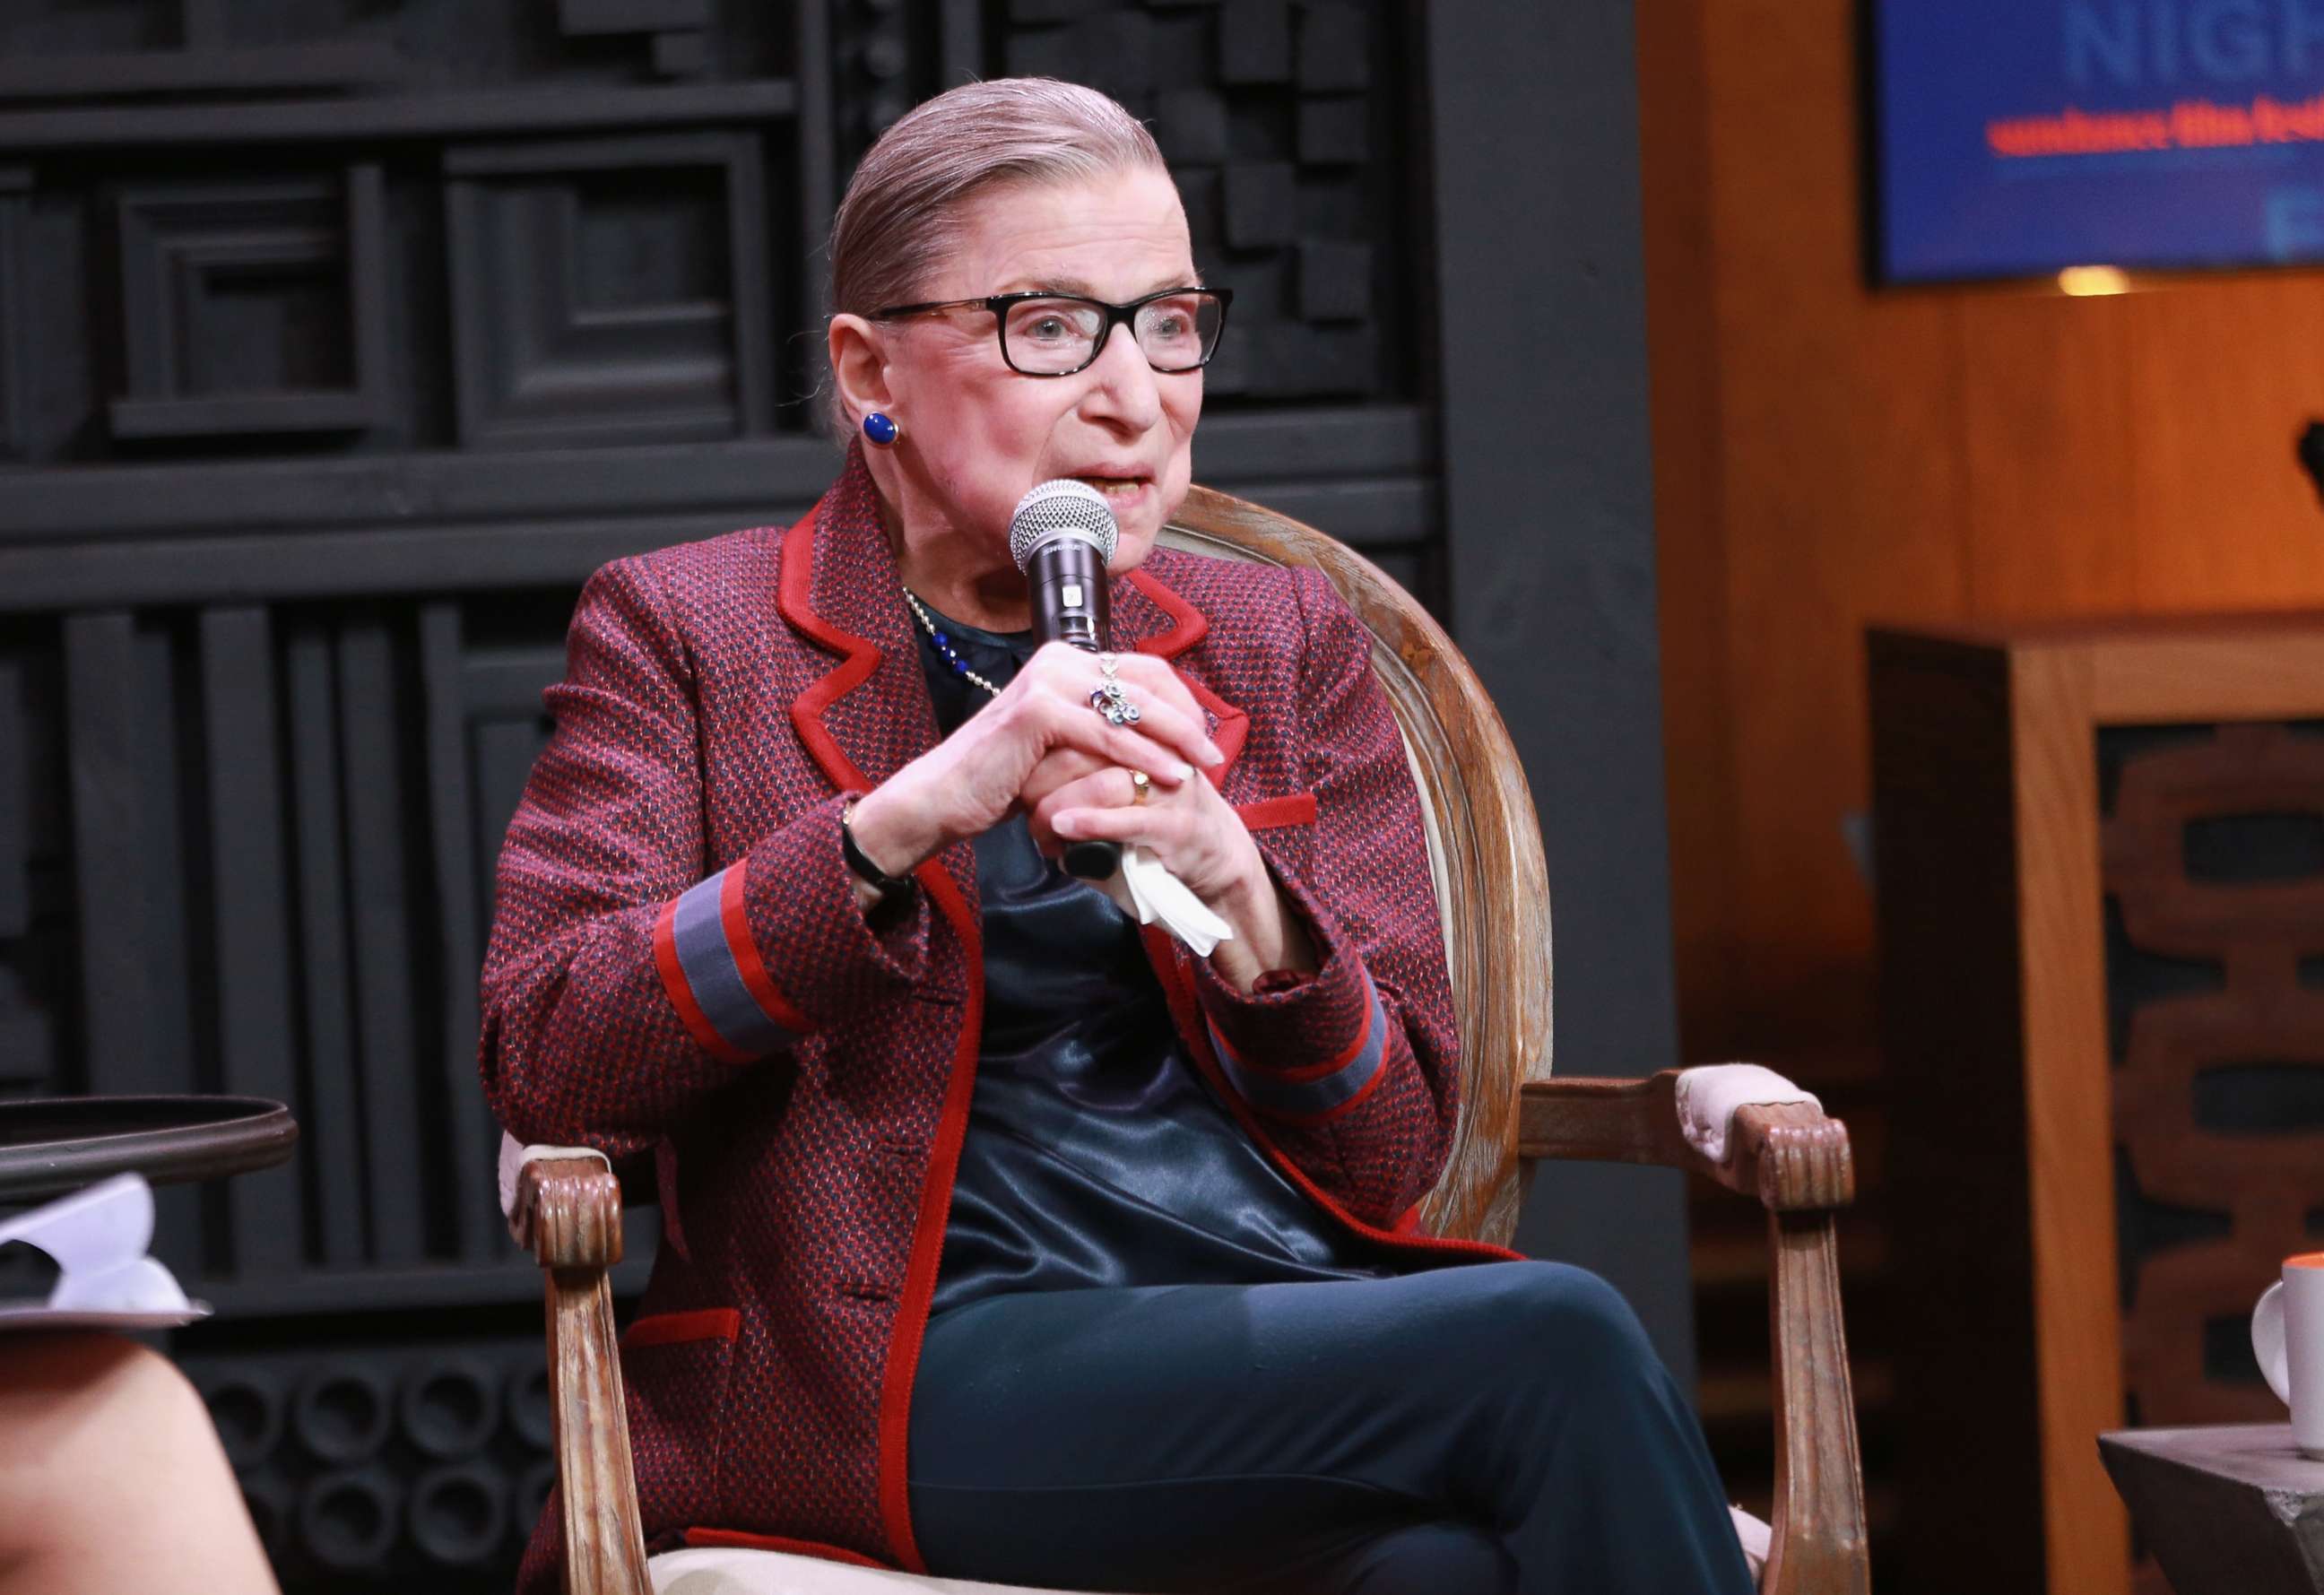 PHOTO: Associate Justice of the Supreme Court of the U.S. Ruth Bader Ginsburg speaks during the Cinema Cafe with Nina Totenberg during the 2018 Sundance Film Festival at Filmmaker Lodge, Jan. 21, 2018, in Park City, Utah.  